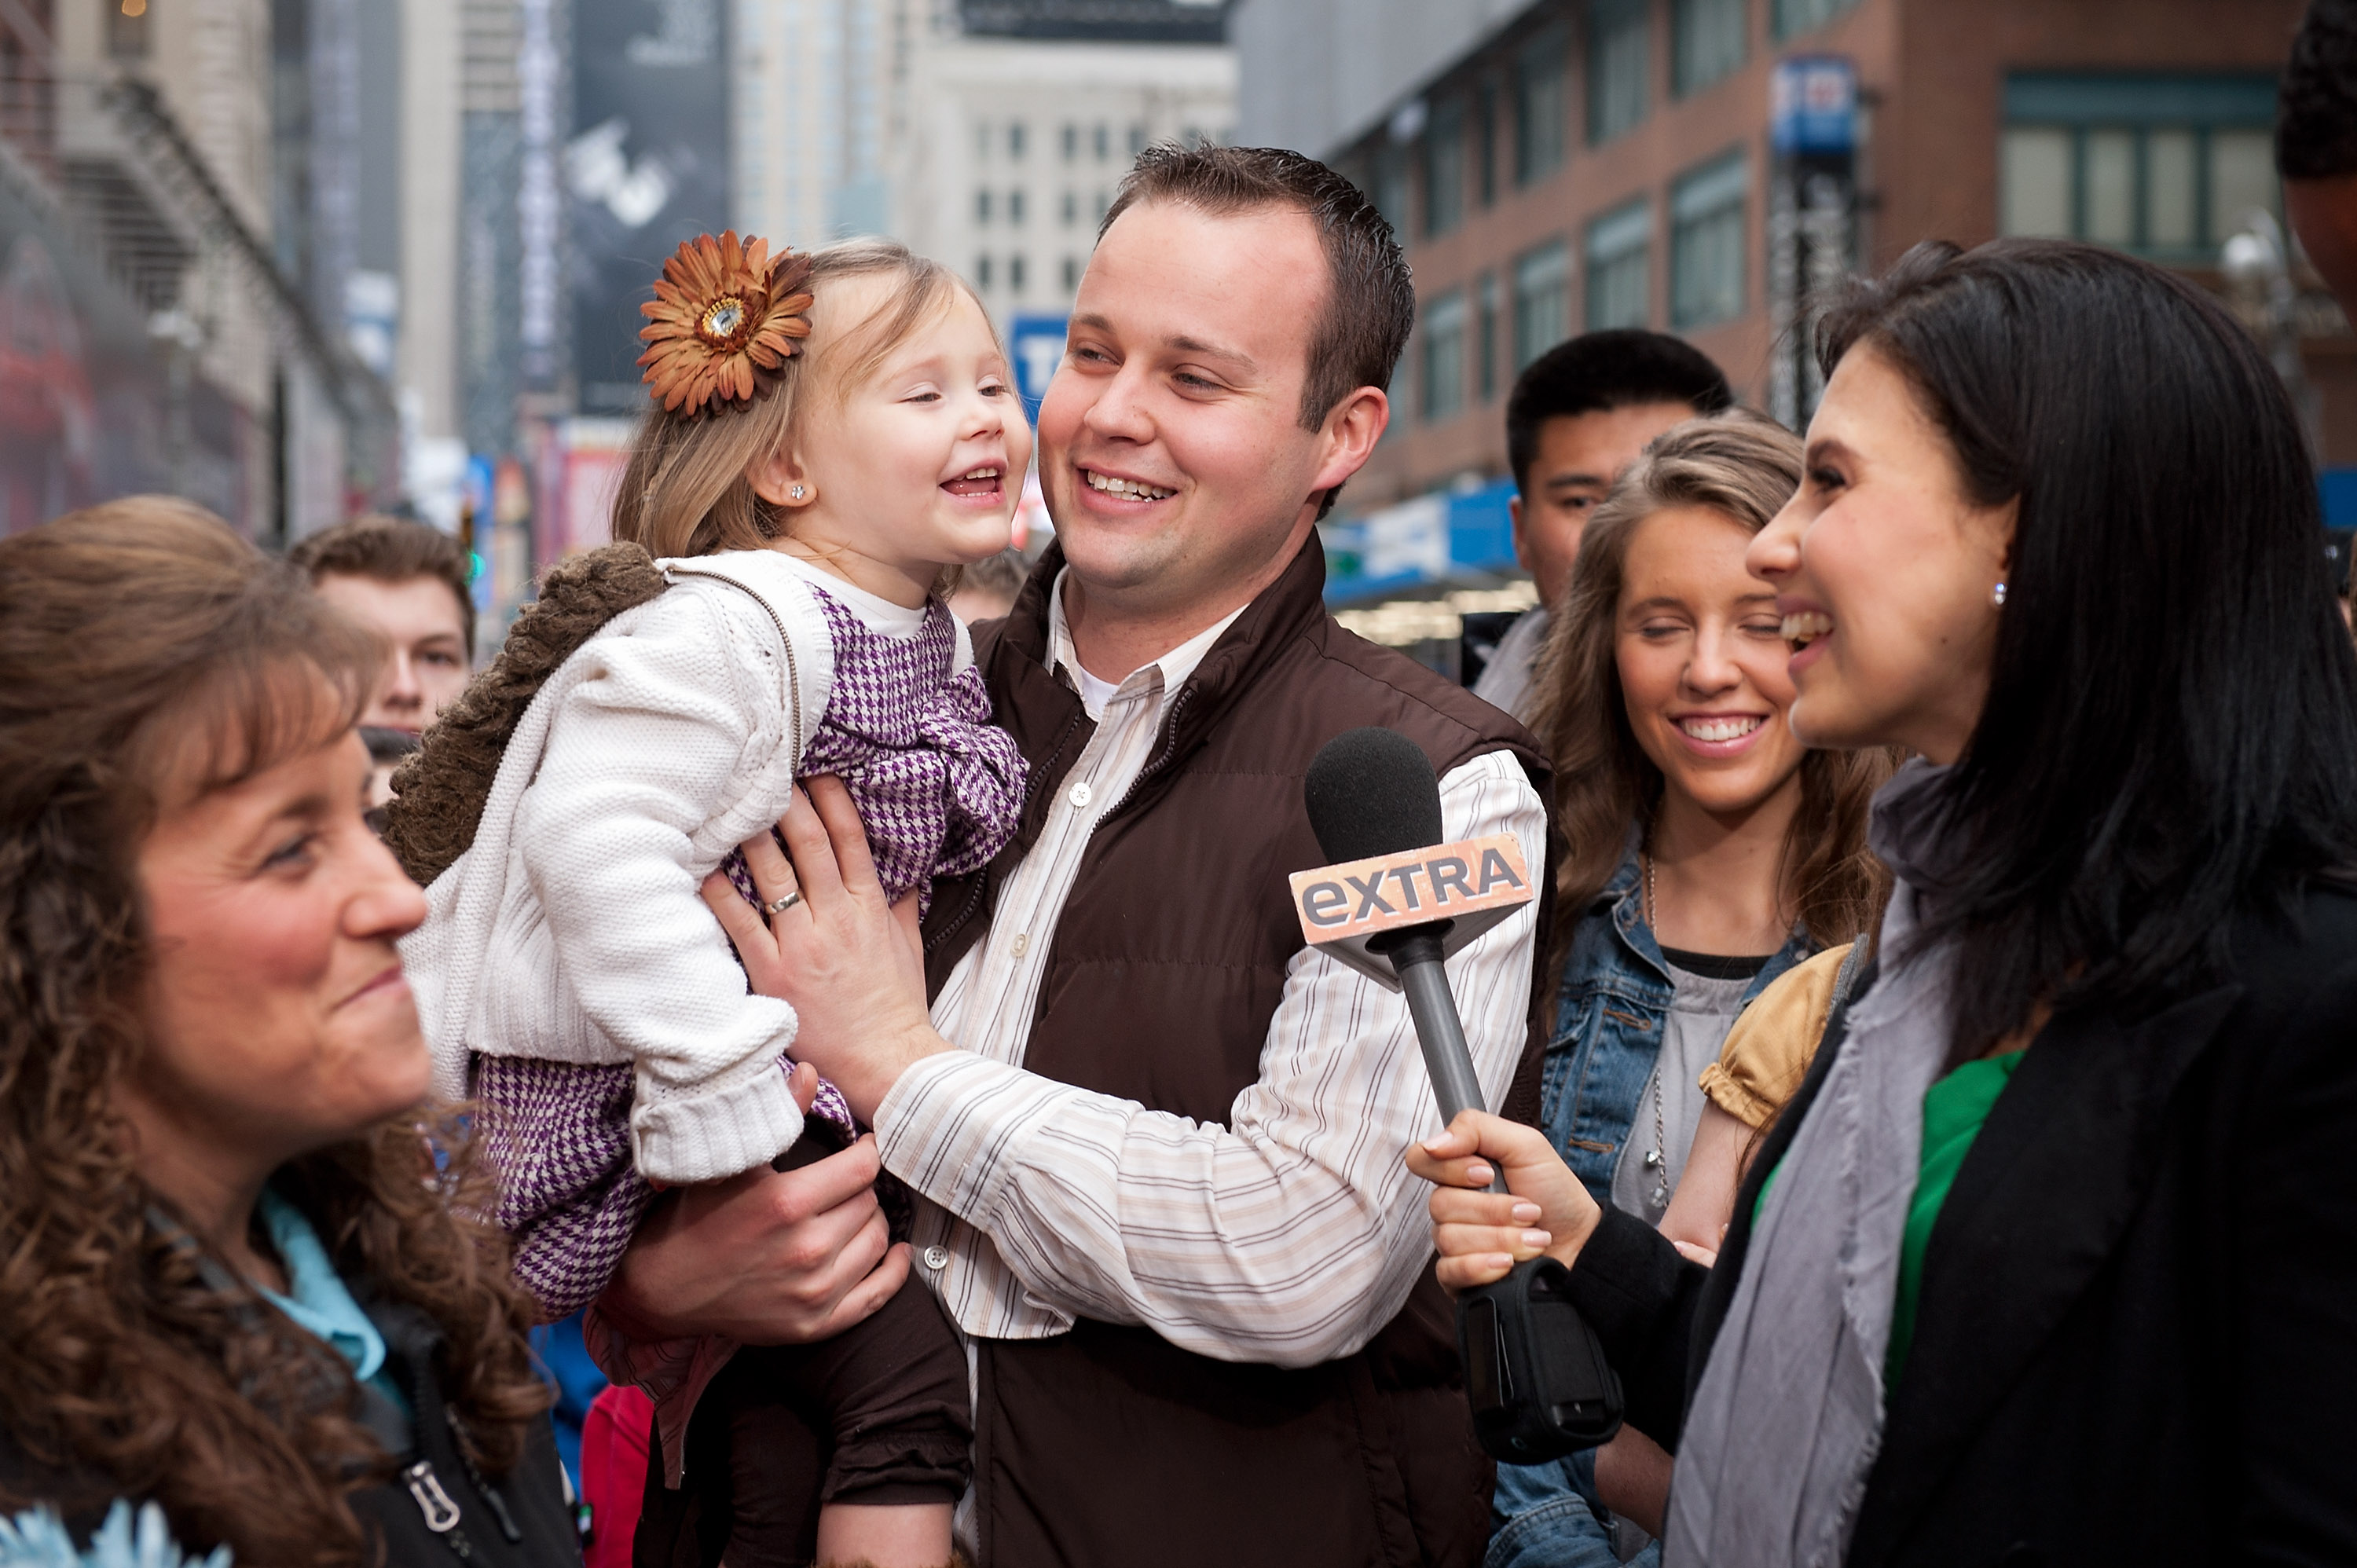 Hilaria Baldwin (R) interviews Josh Duggar and his daughter during their visit with 'Extra'